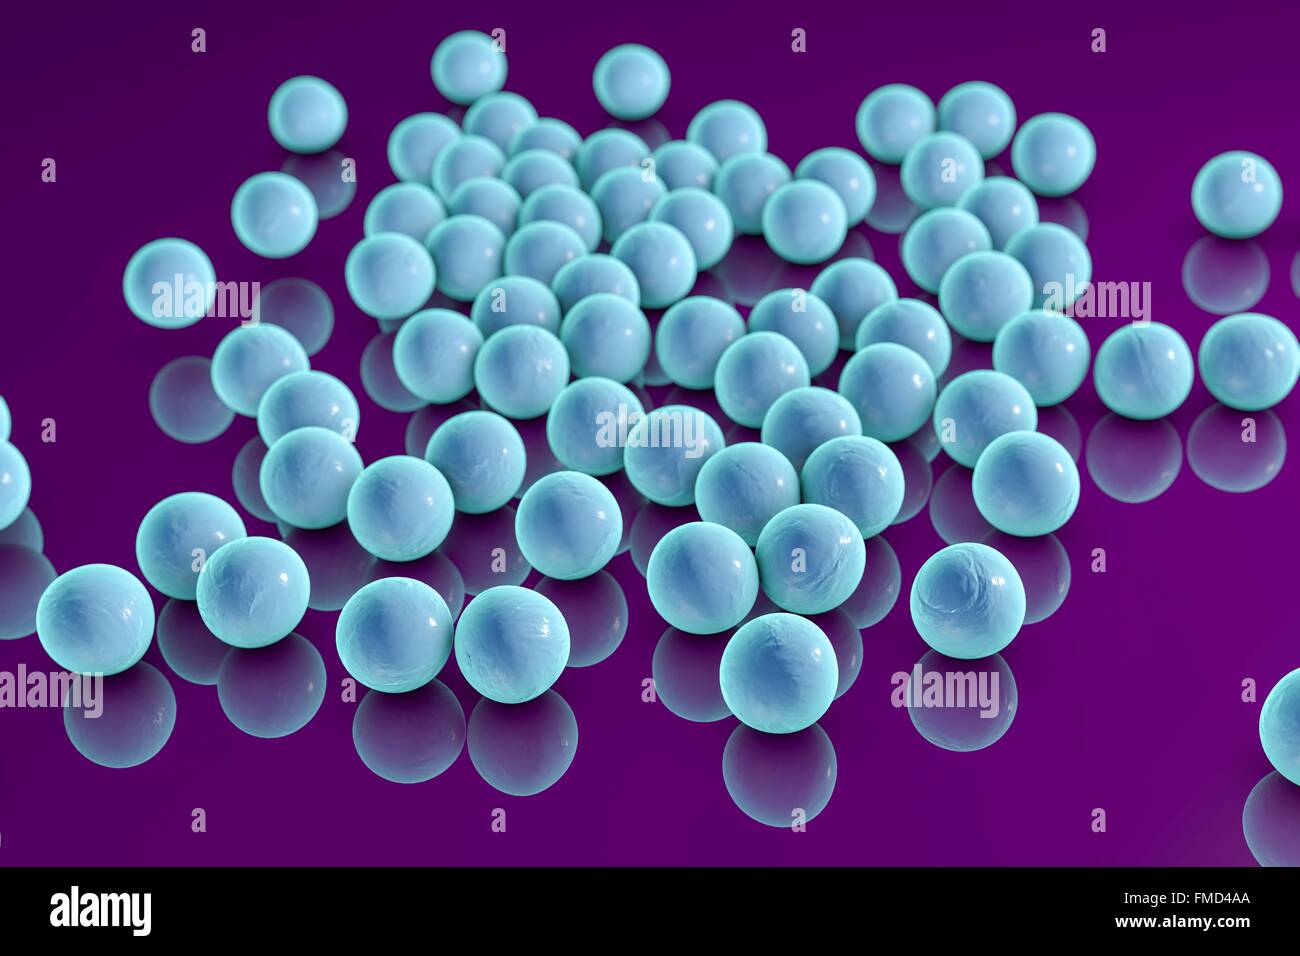 Computer illustration of staphylococci bacteria (Staphylococcus Stock